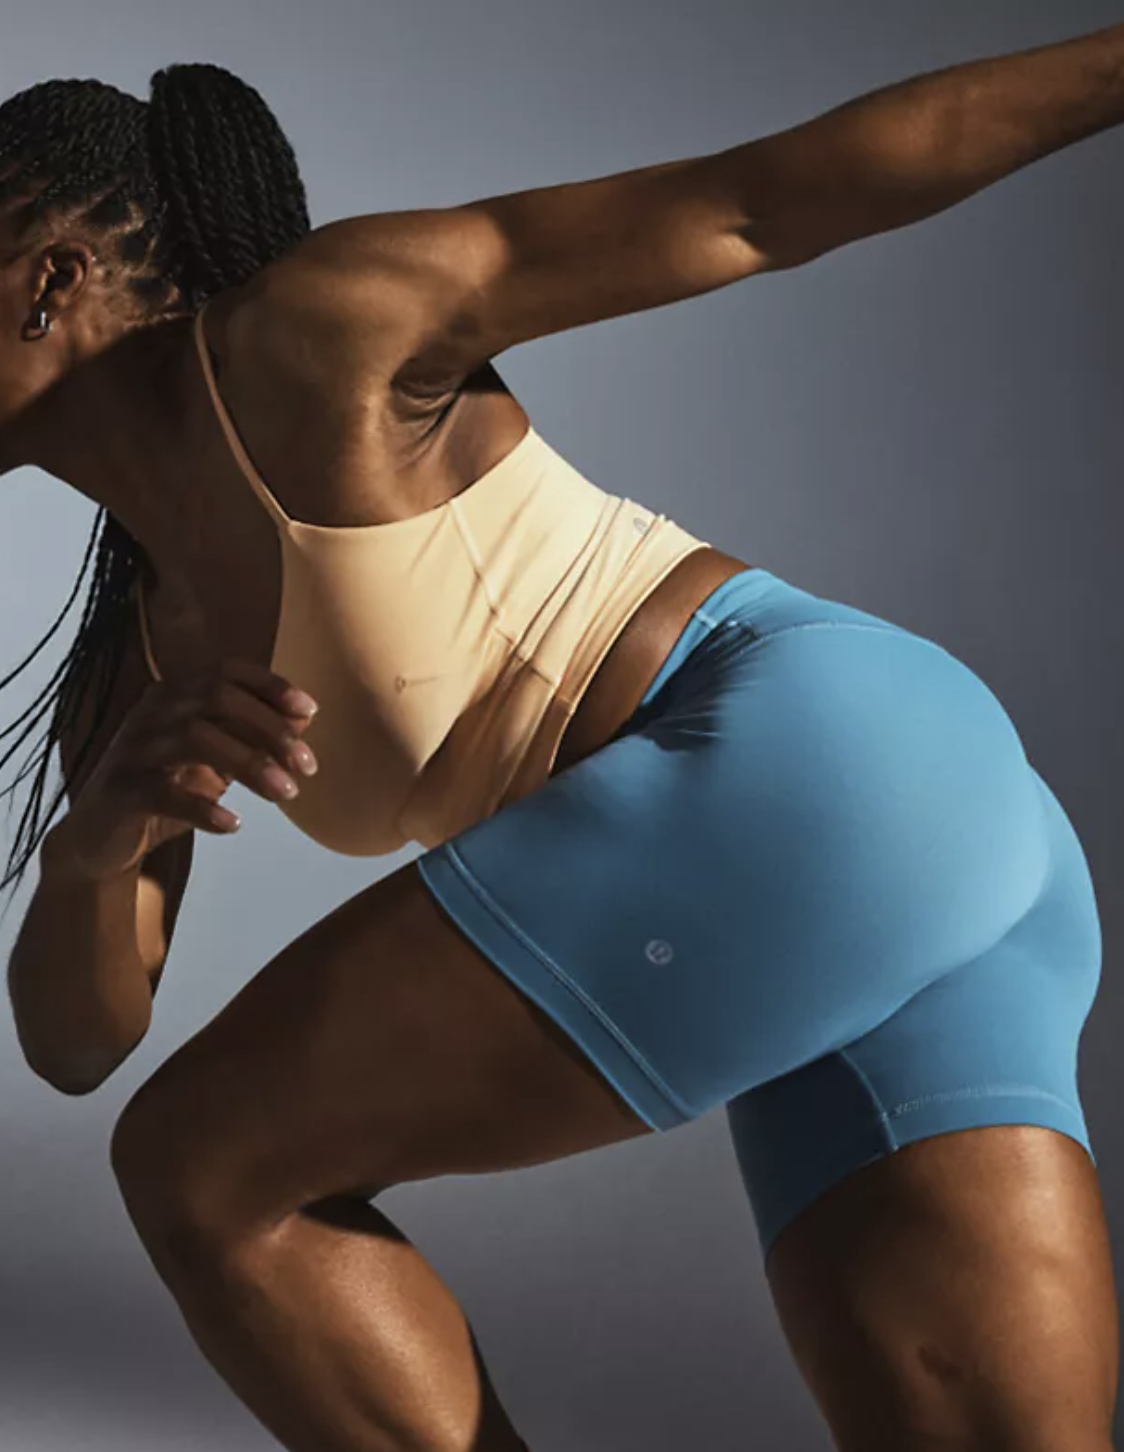 Lululemon Clothes You'll Love For Every Workout